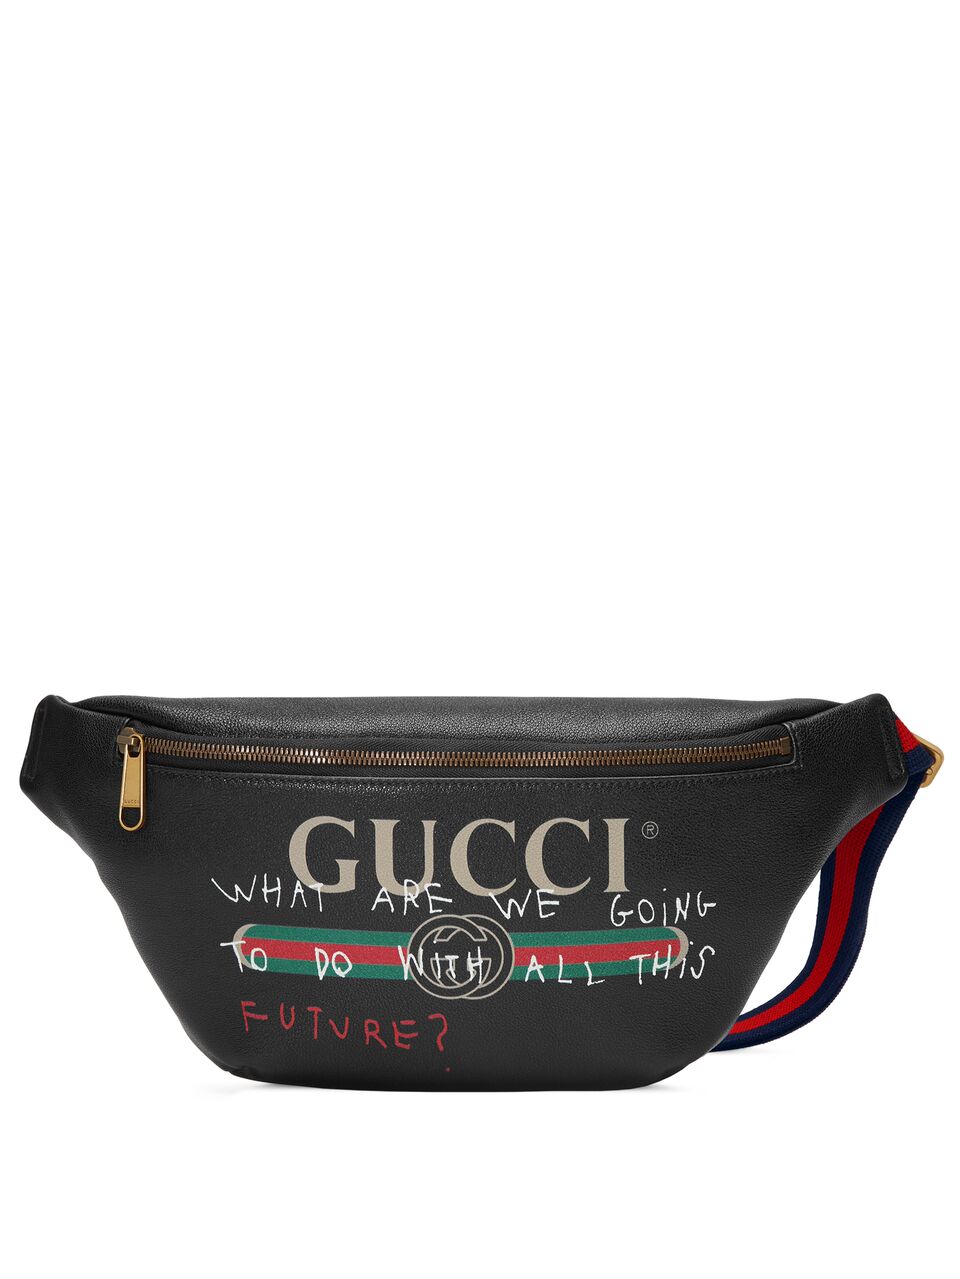 gucci fanny pack common sense is not that common